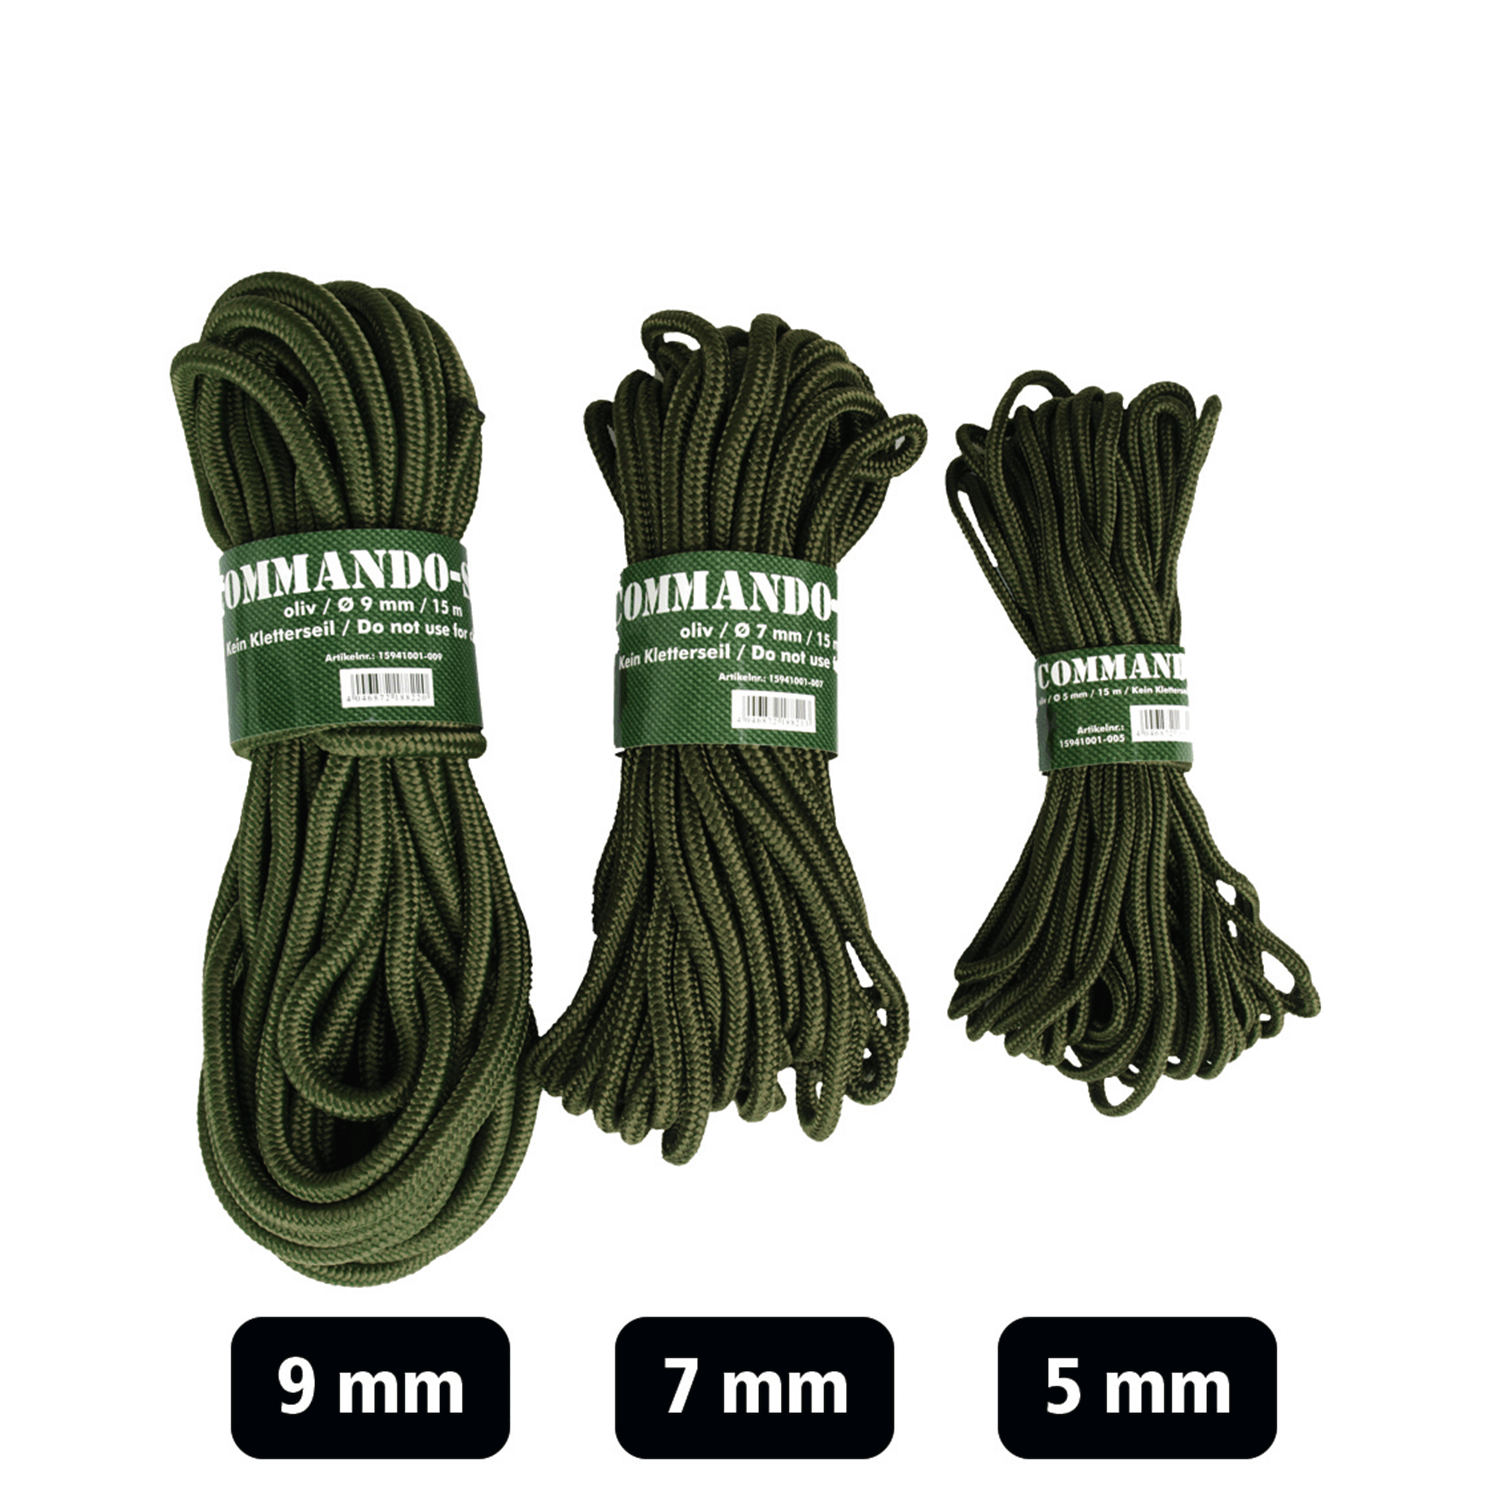 Mil-Tec paracord command (oliv) -  Hunting Ground Work Tools